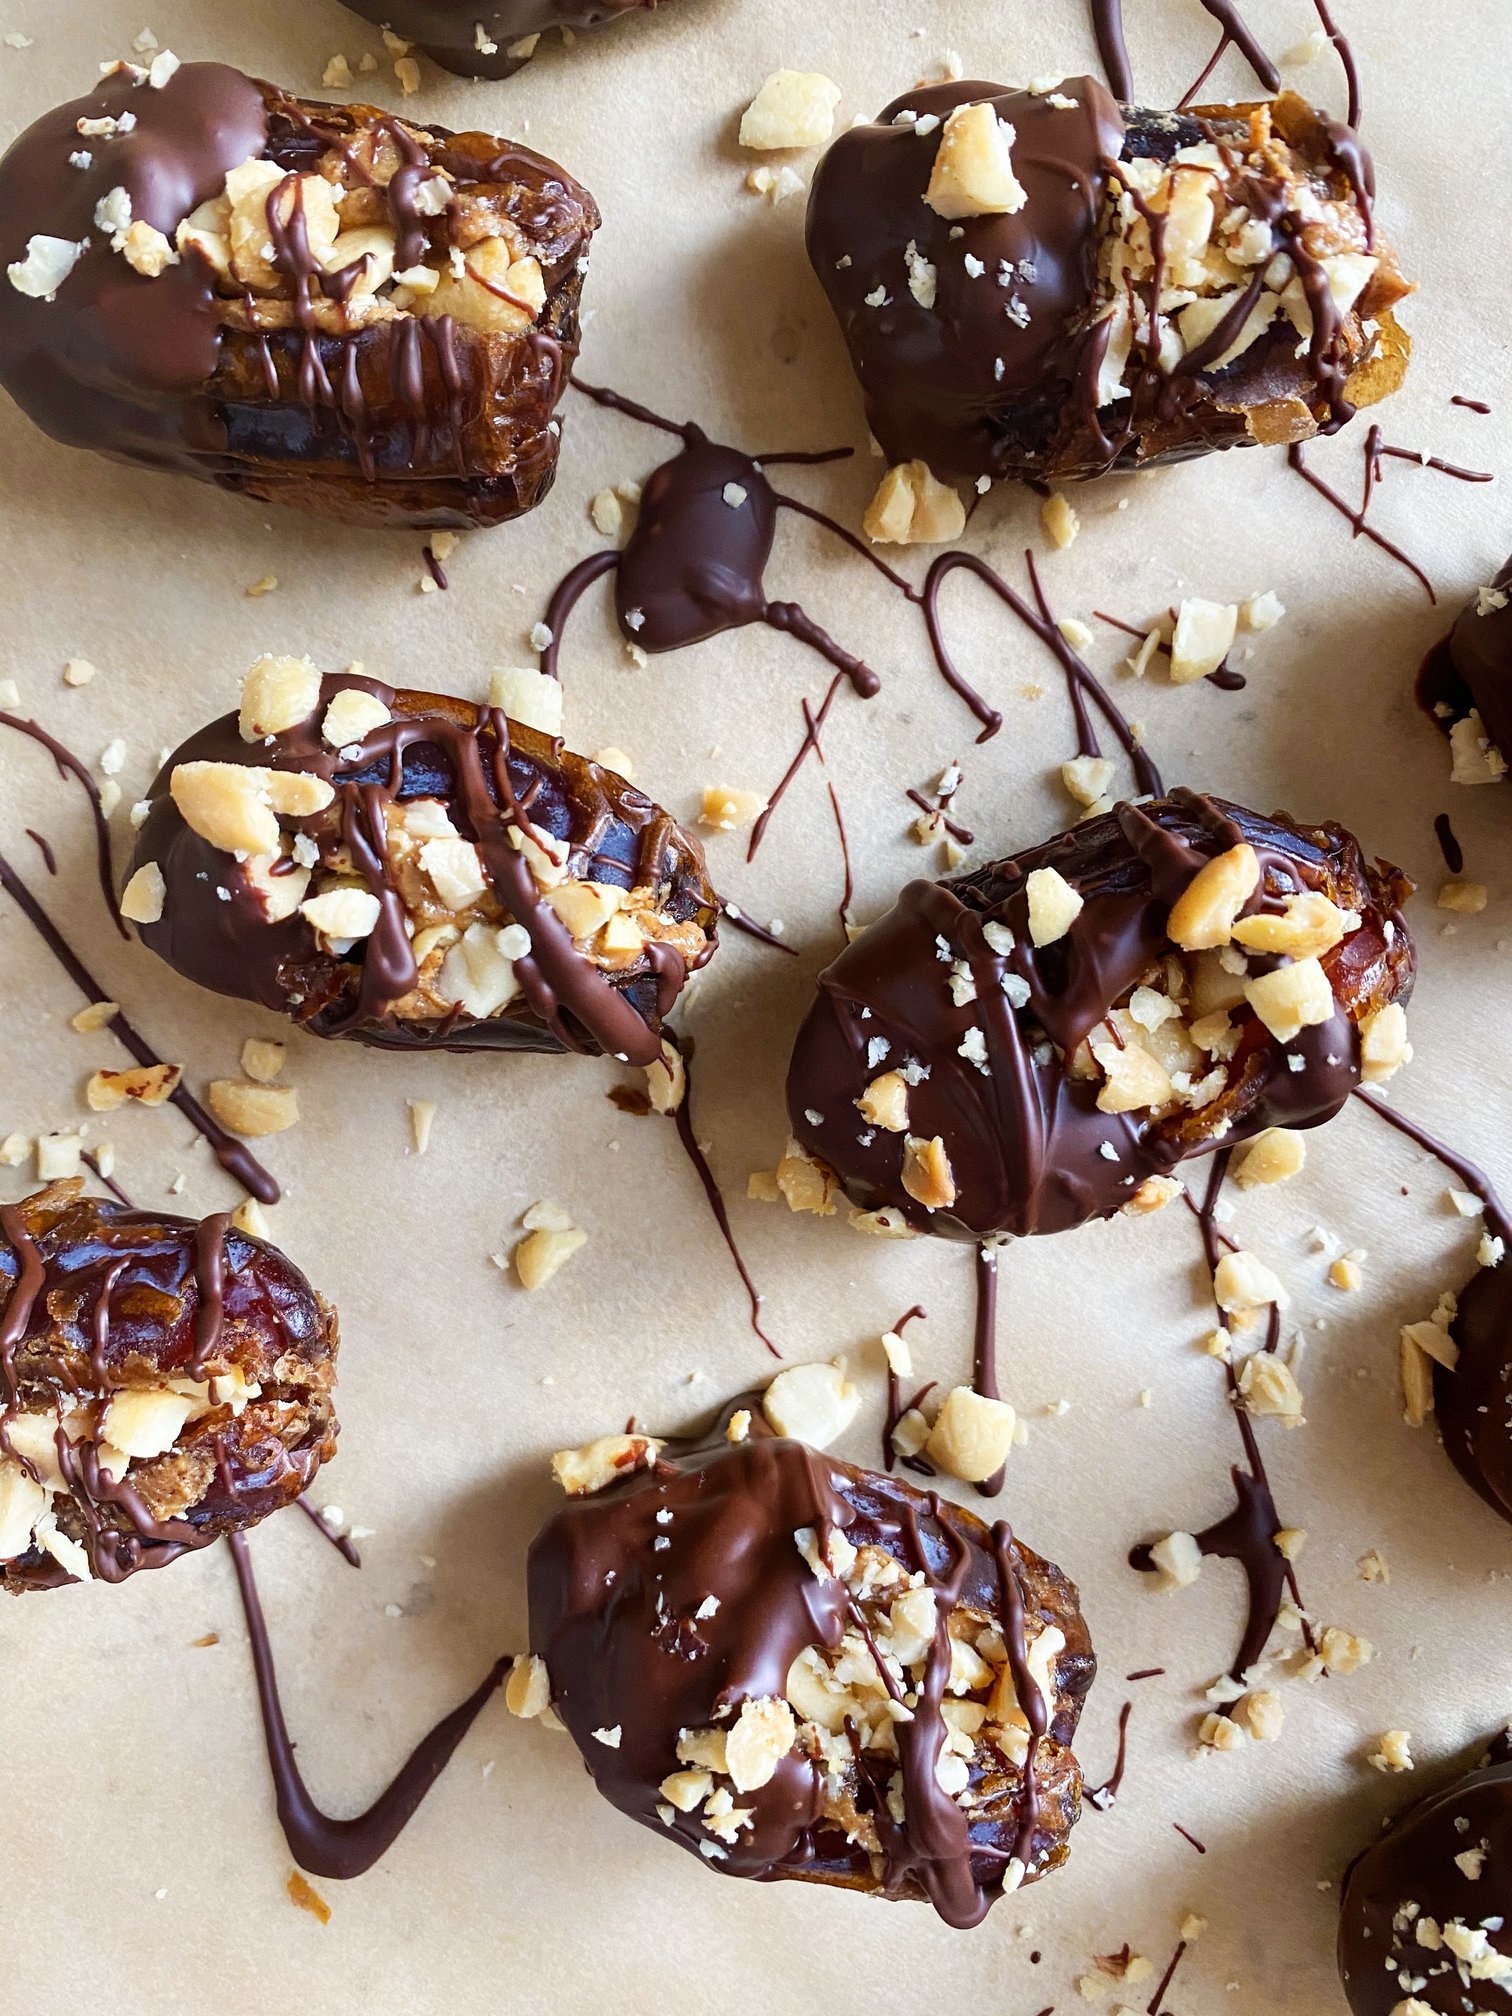 Download Recipe:Snickers Stuffed Dates